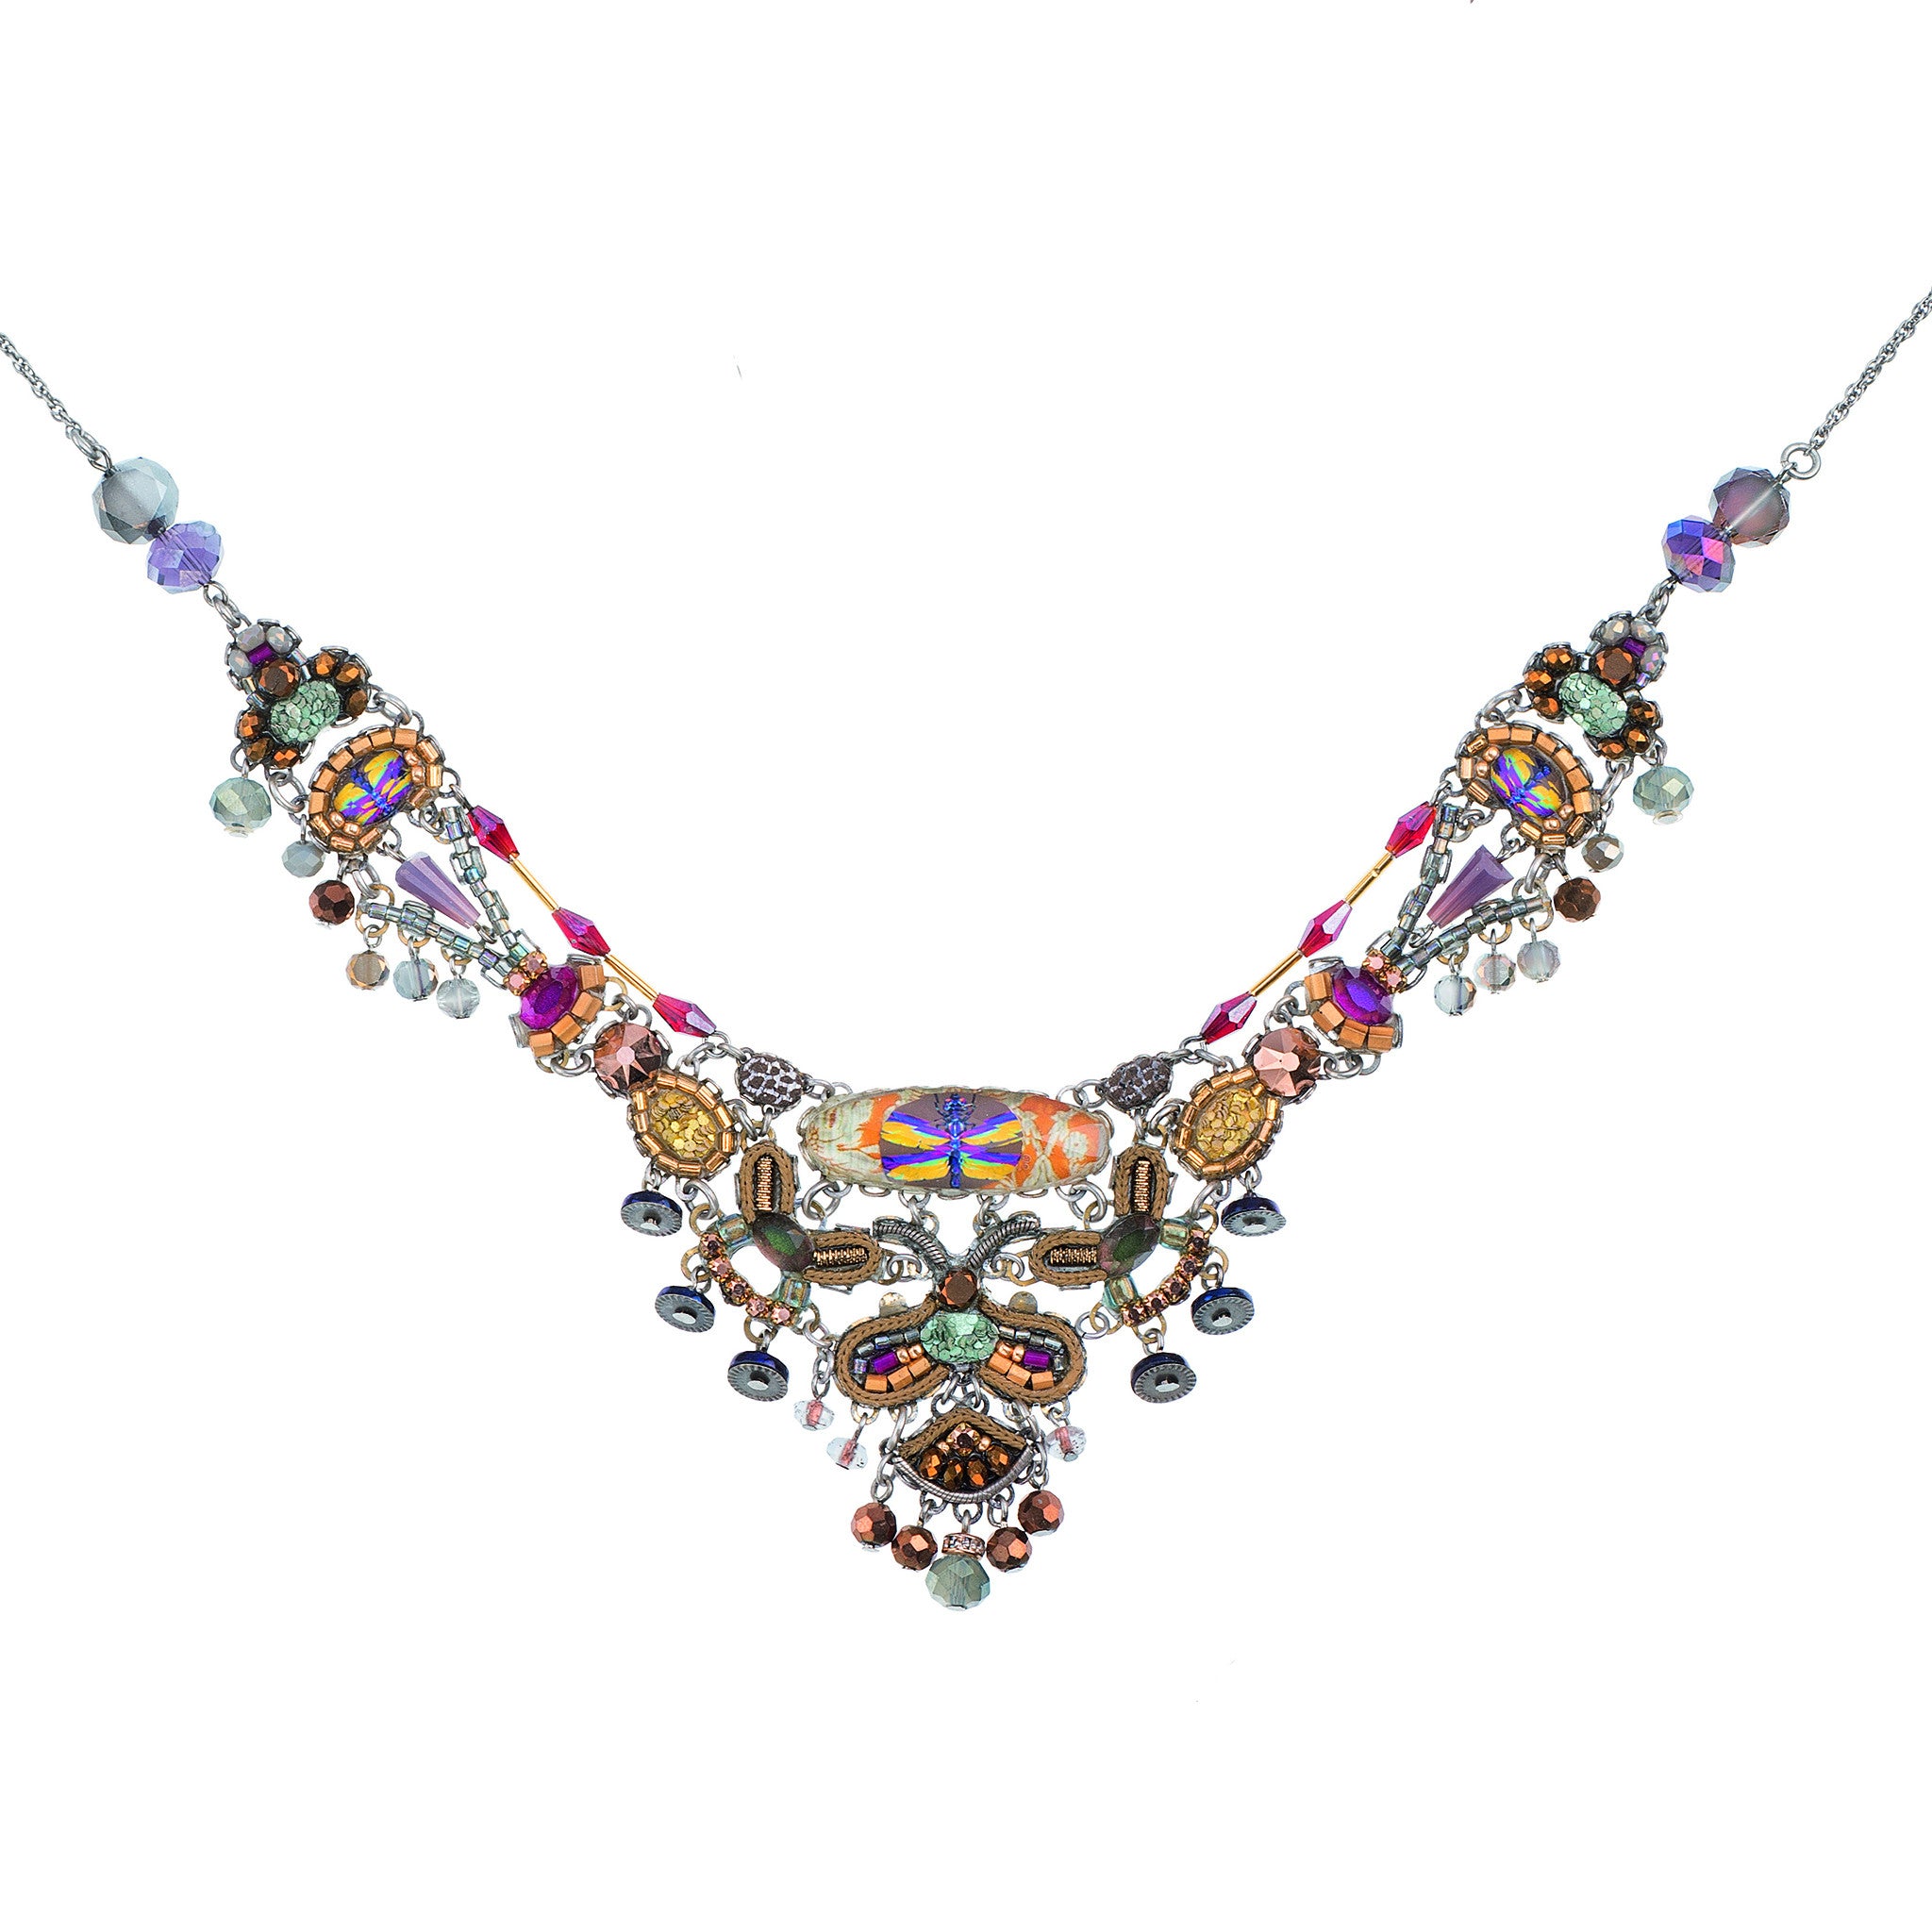 Mojave Leah Necklace - Ayala Bar – The Getty Store